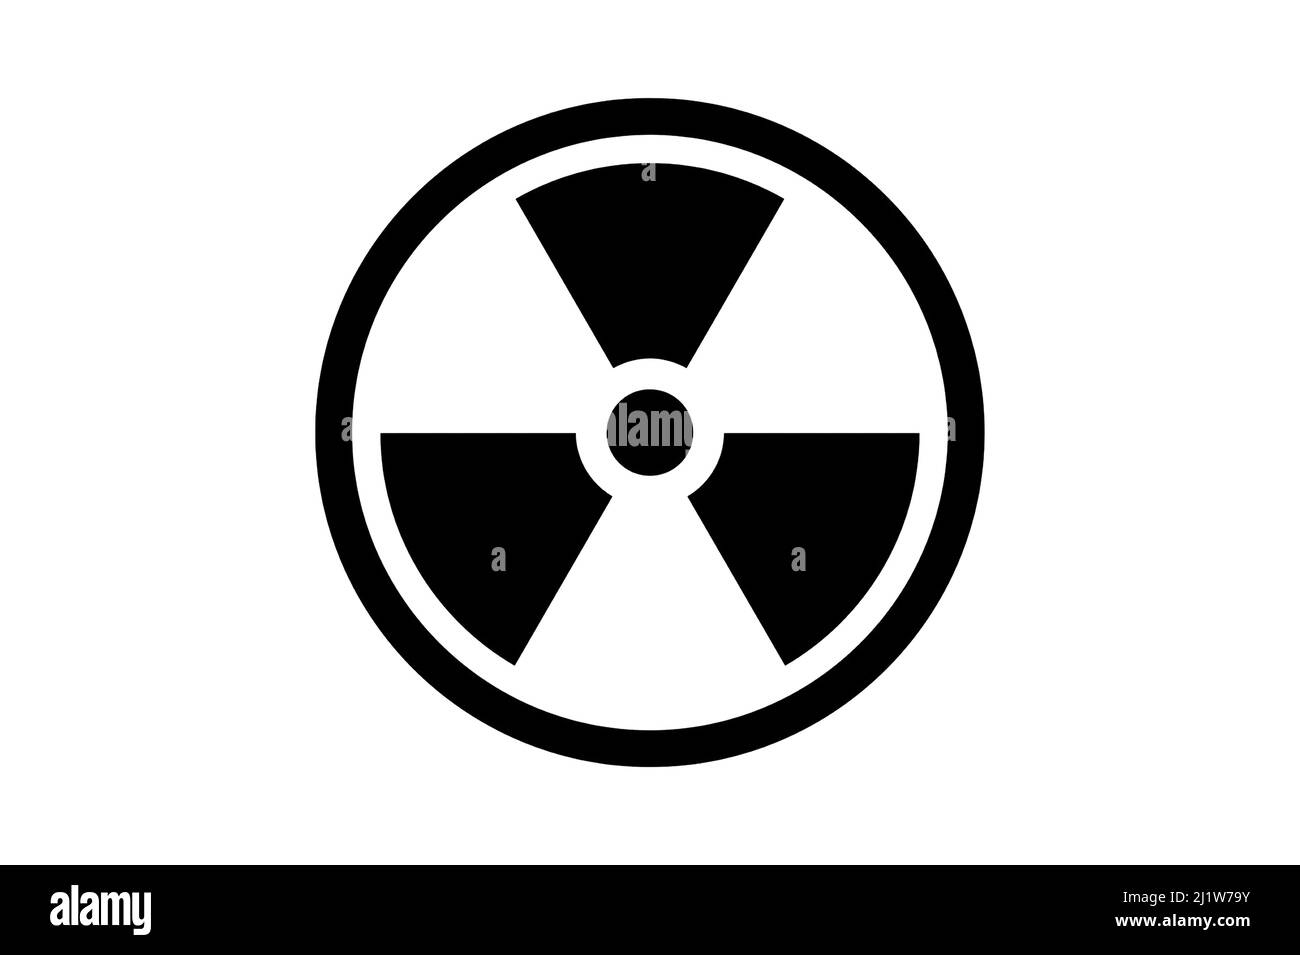 Nuclear weapons. Nuclear weapons logo design. Smooth bottom for easy selection. Horizontal design. Stock Photo